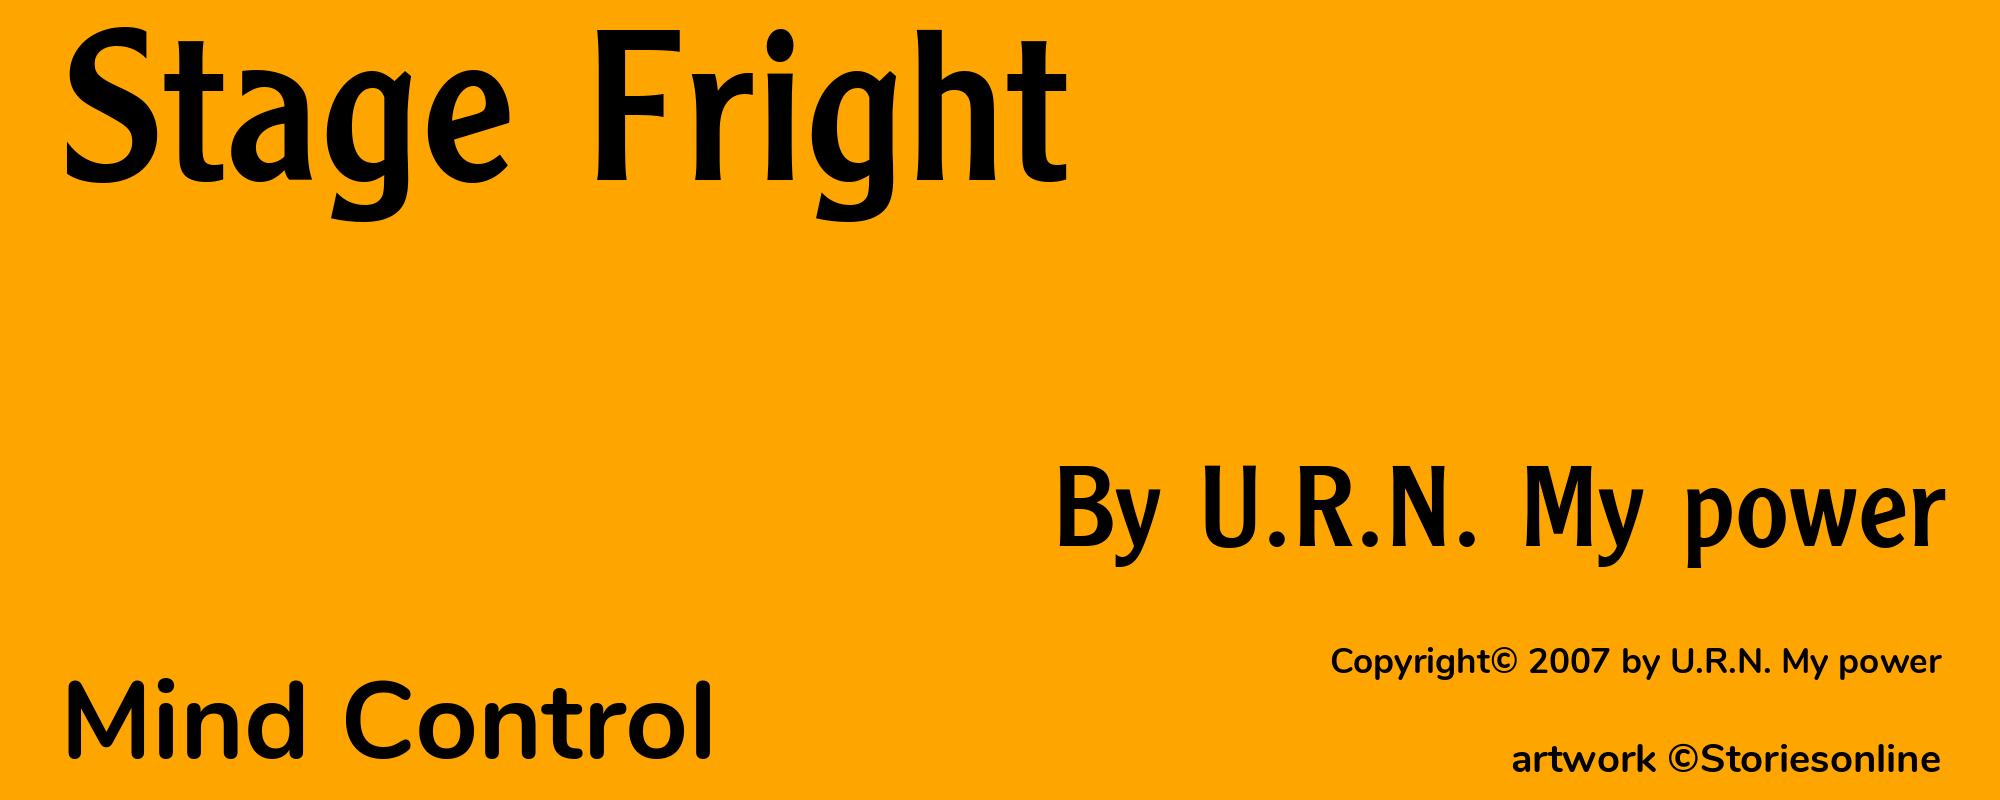 Stage Fright - Cover